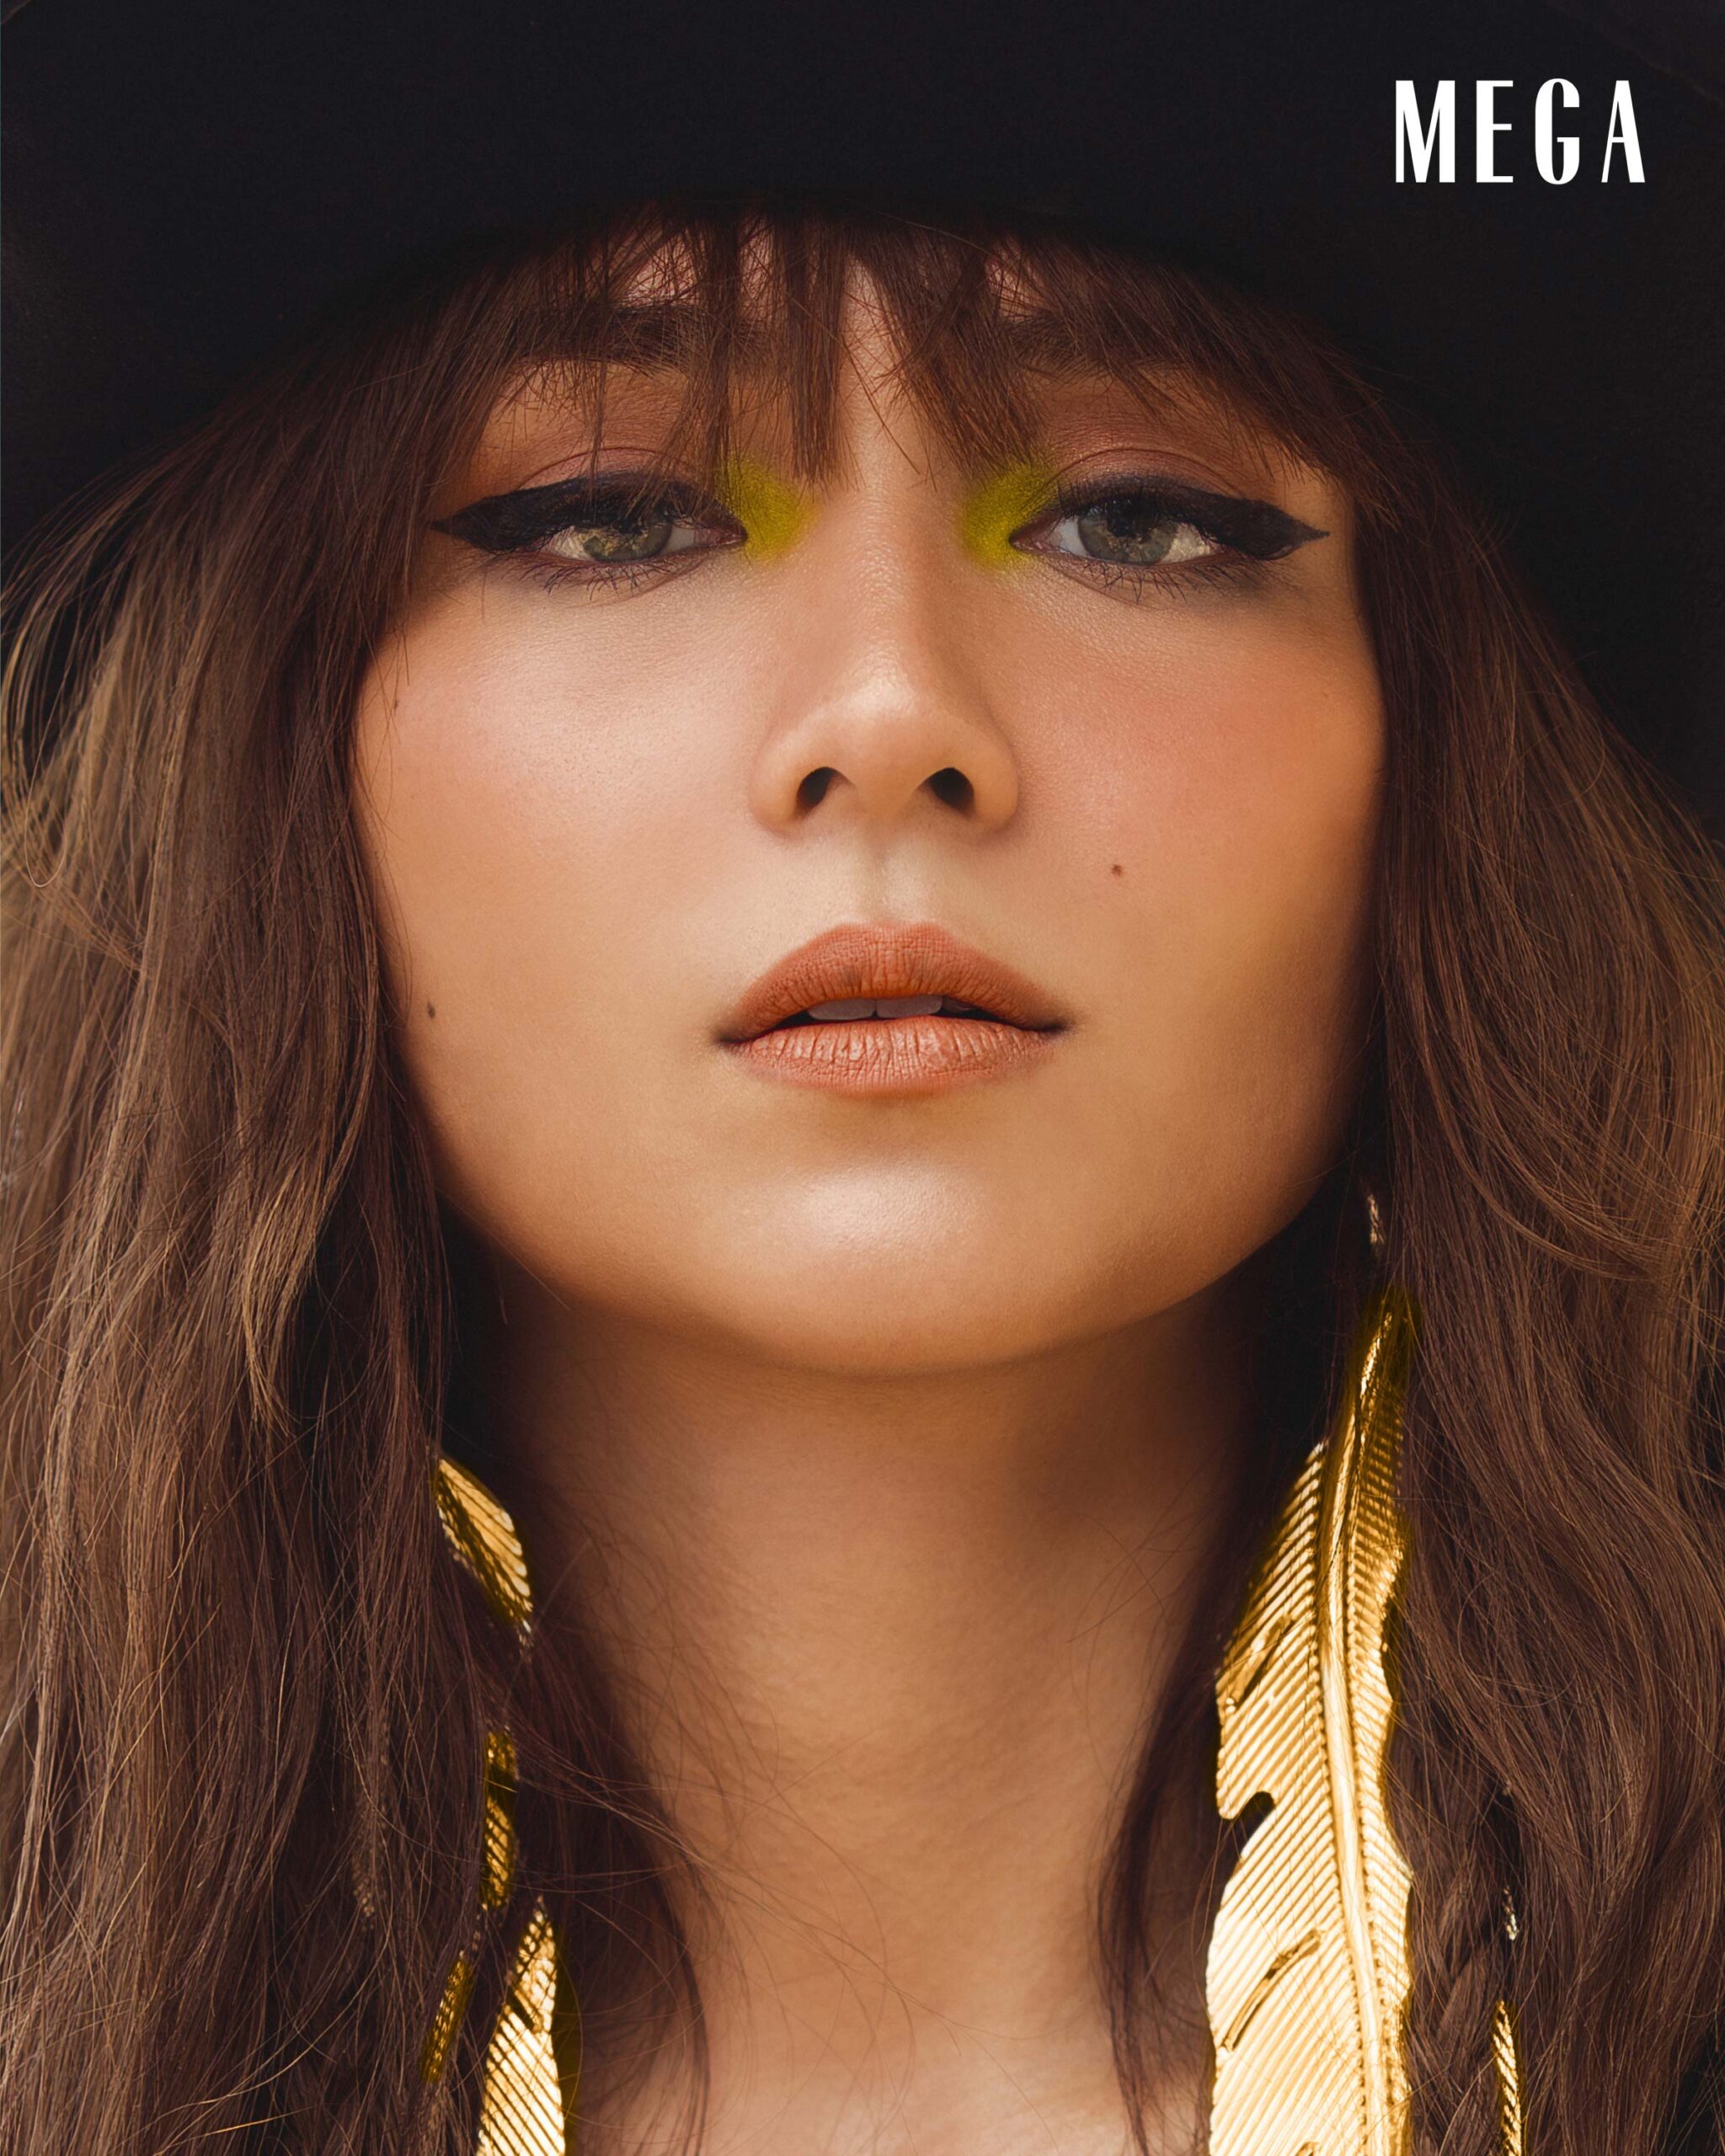 Kathryn Bernardo has given the bohemian fashion comeback her seal of approval, of course, taking her turn with a gold feather earring 